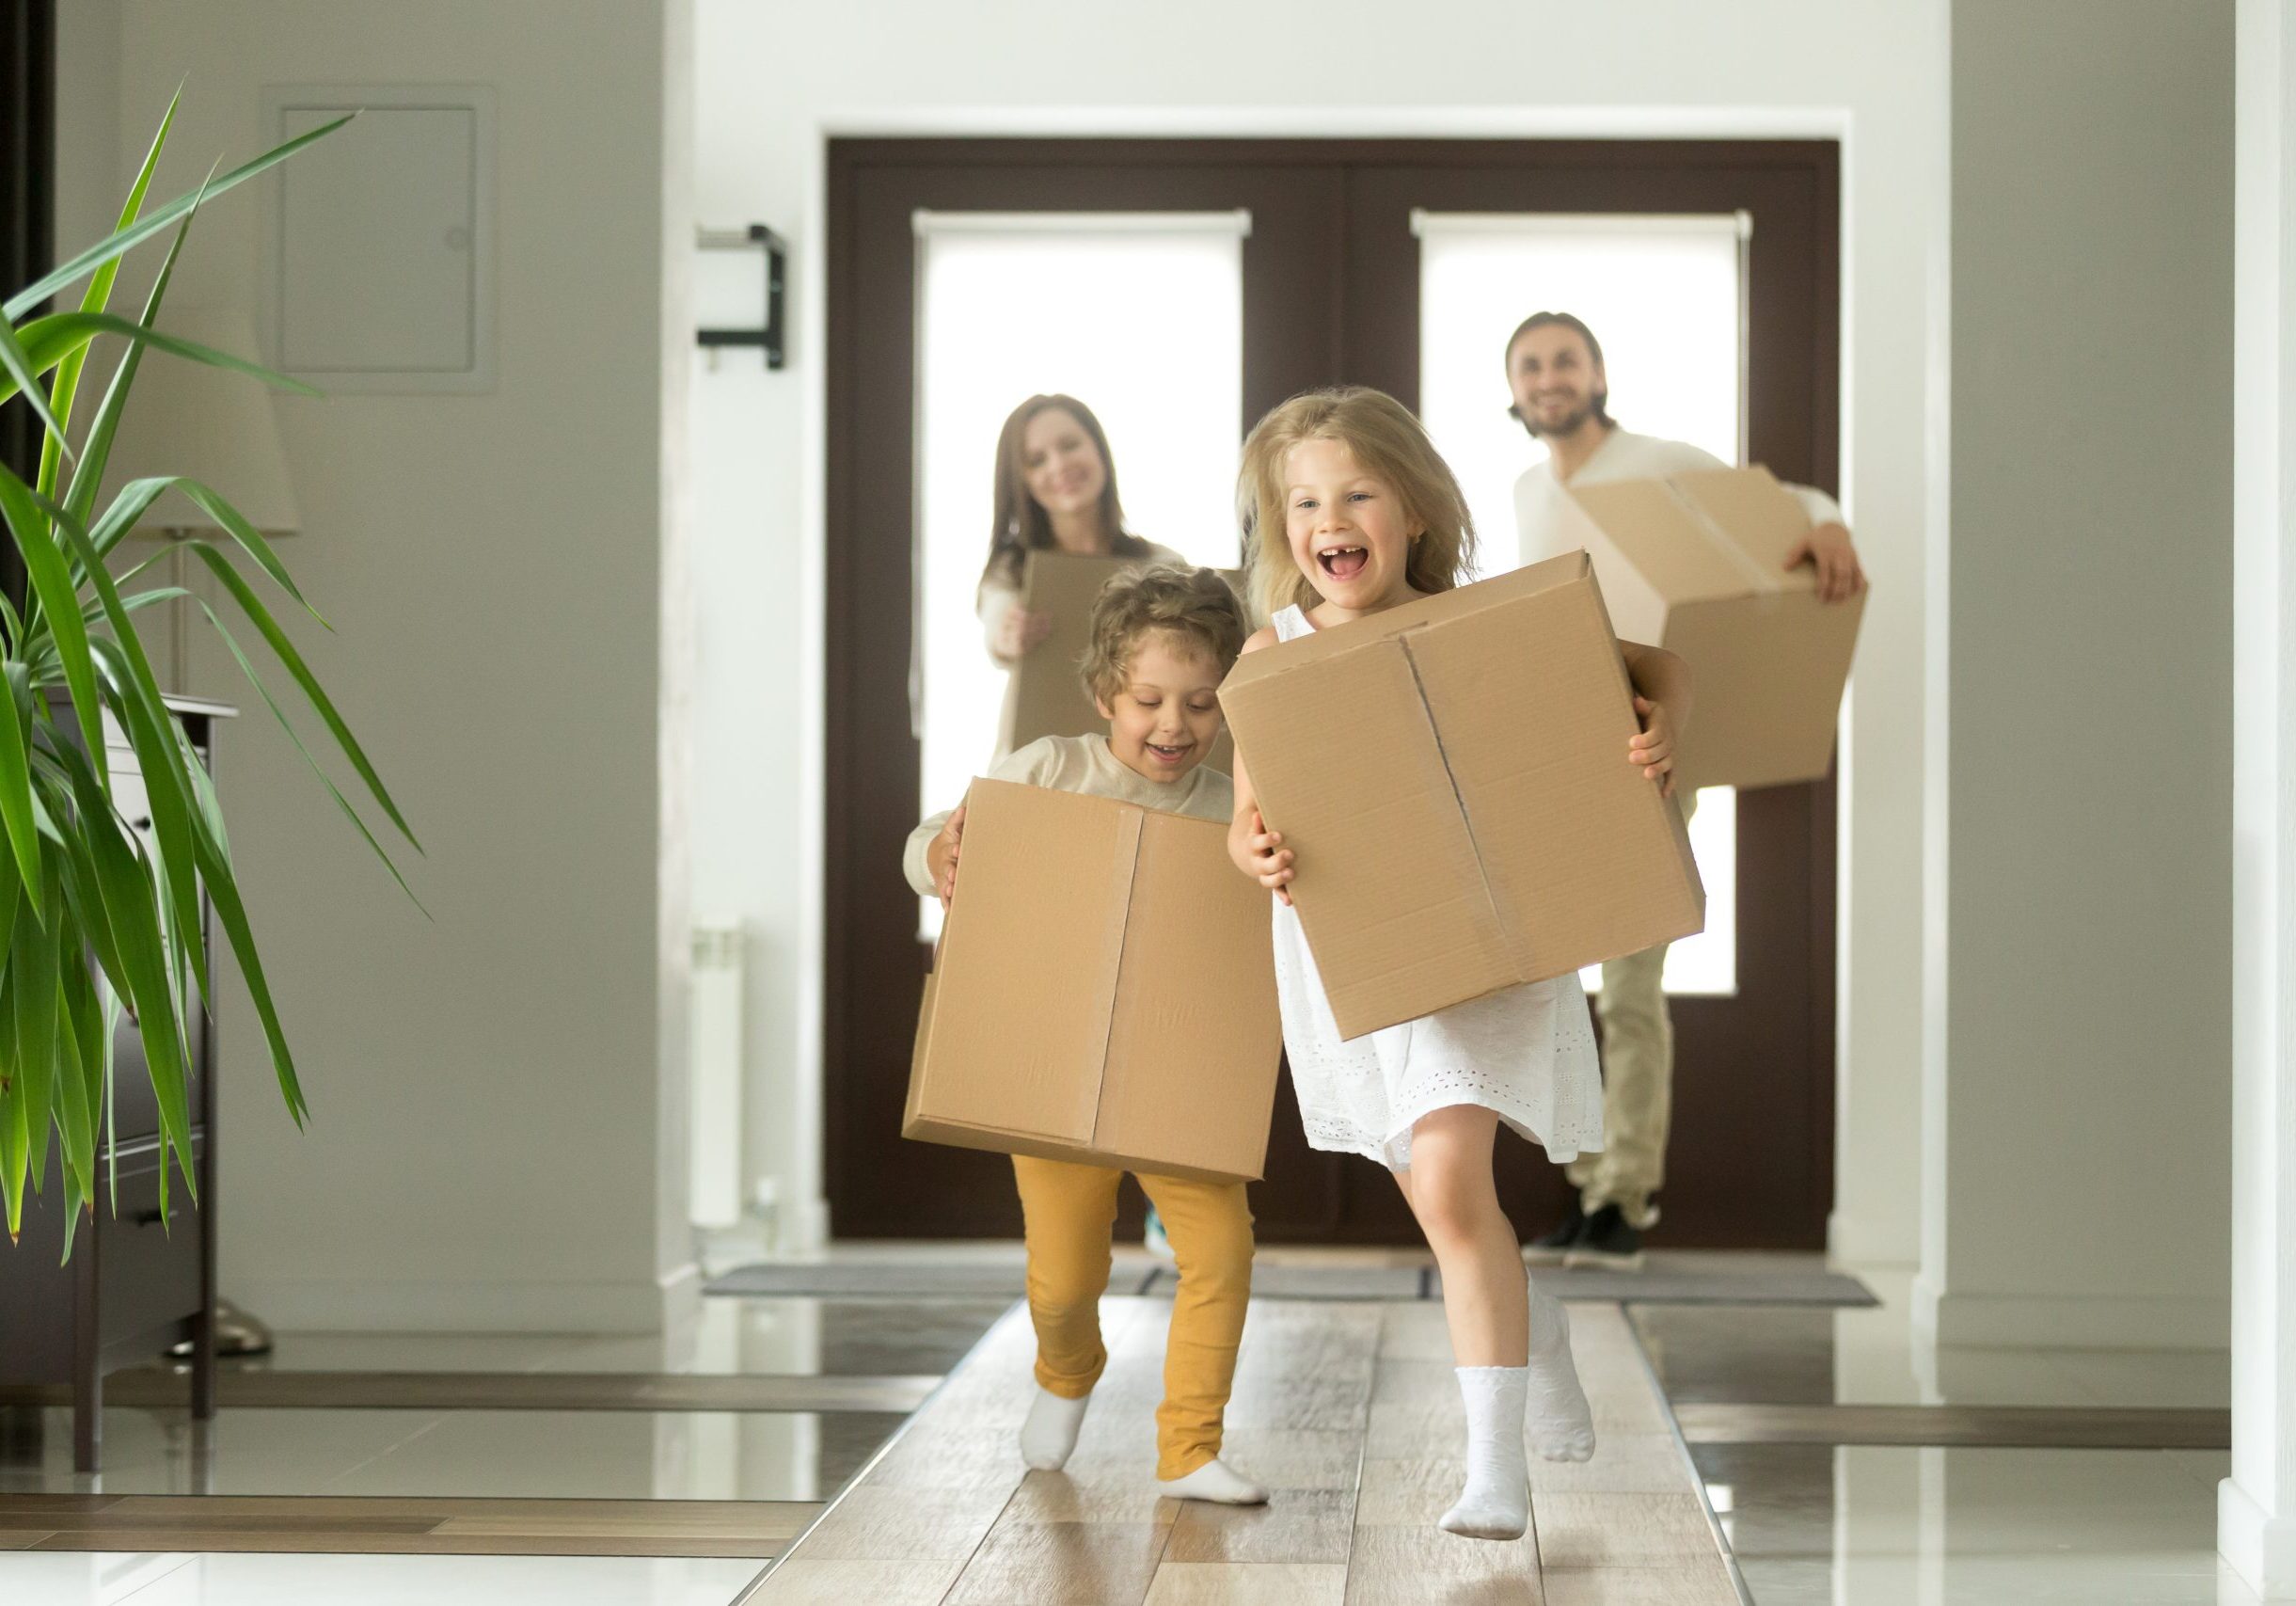 Happy family with kids bought new home, excited children funny girl and boy holding boxes running into big modern house, helping parents with belongings, moving day concept, mortgage and relocation